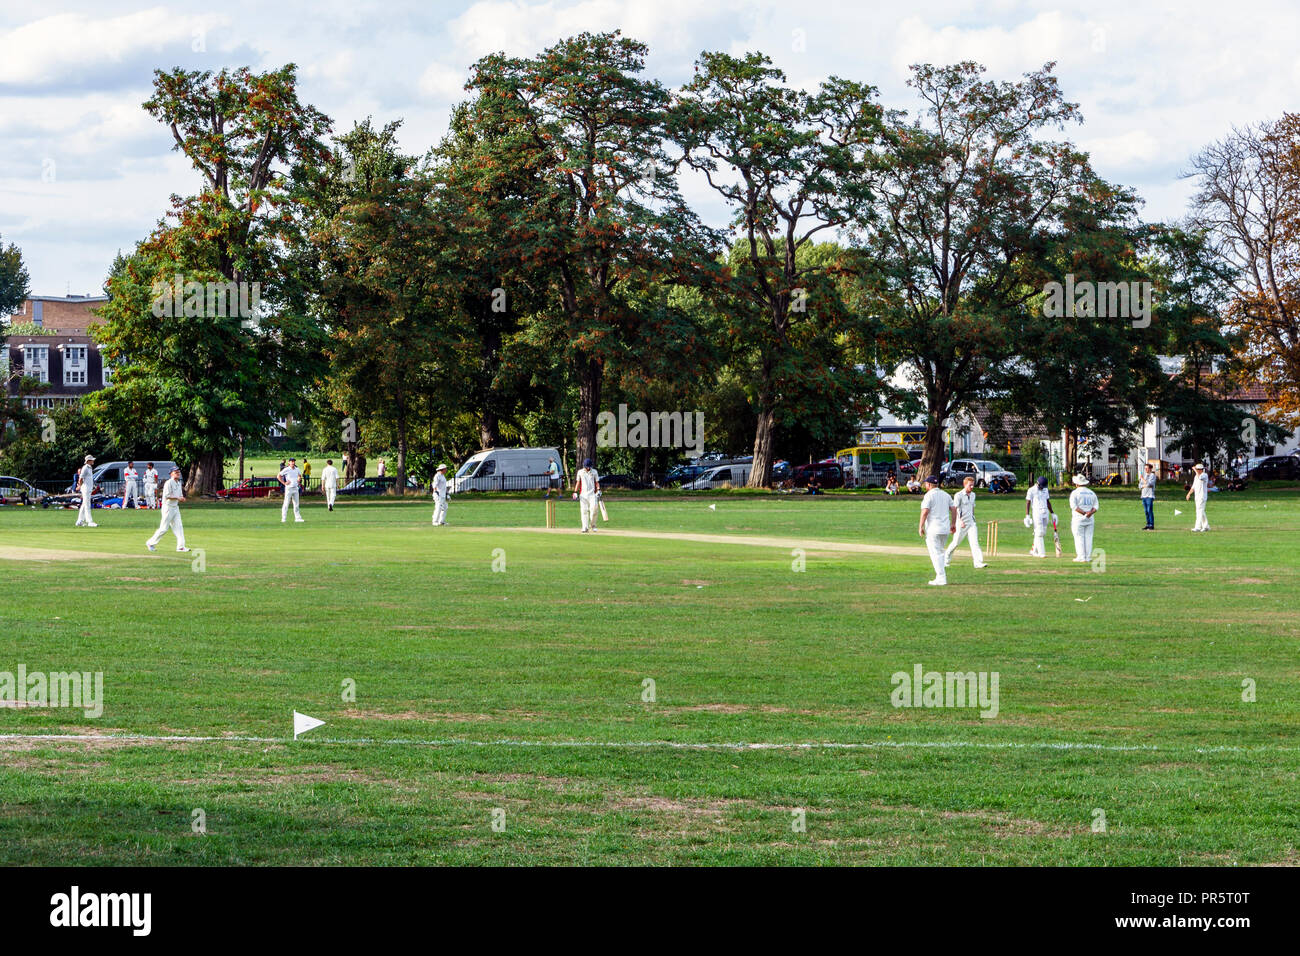 A Sunday cricket match in Springfield Park by the River Lea, London, UK Stock Photo